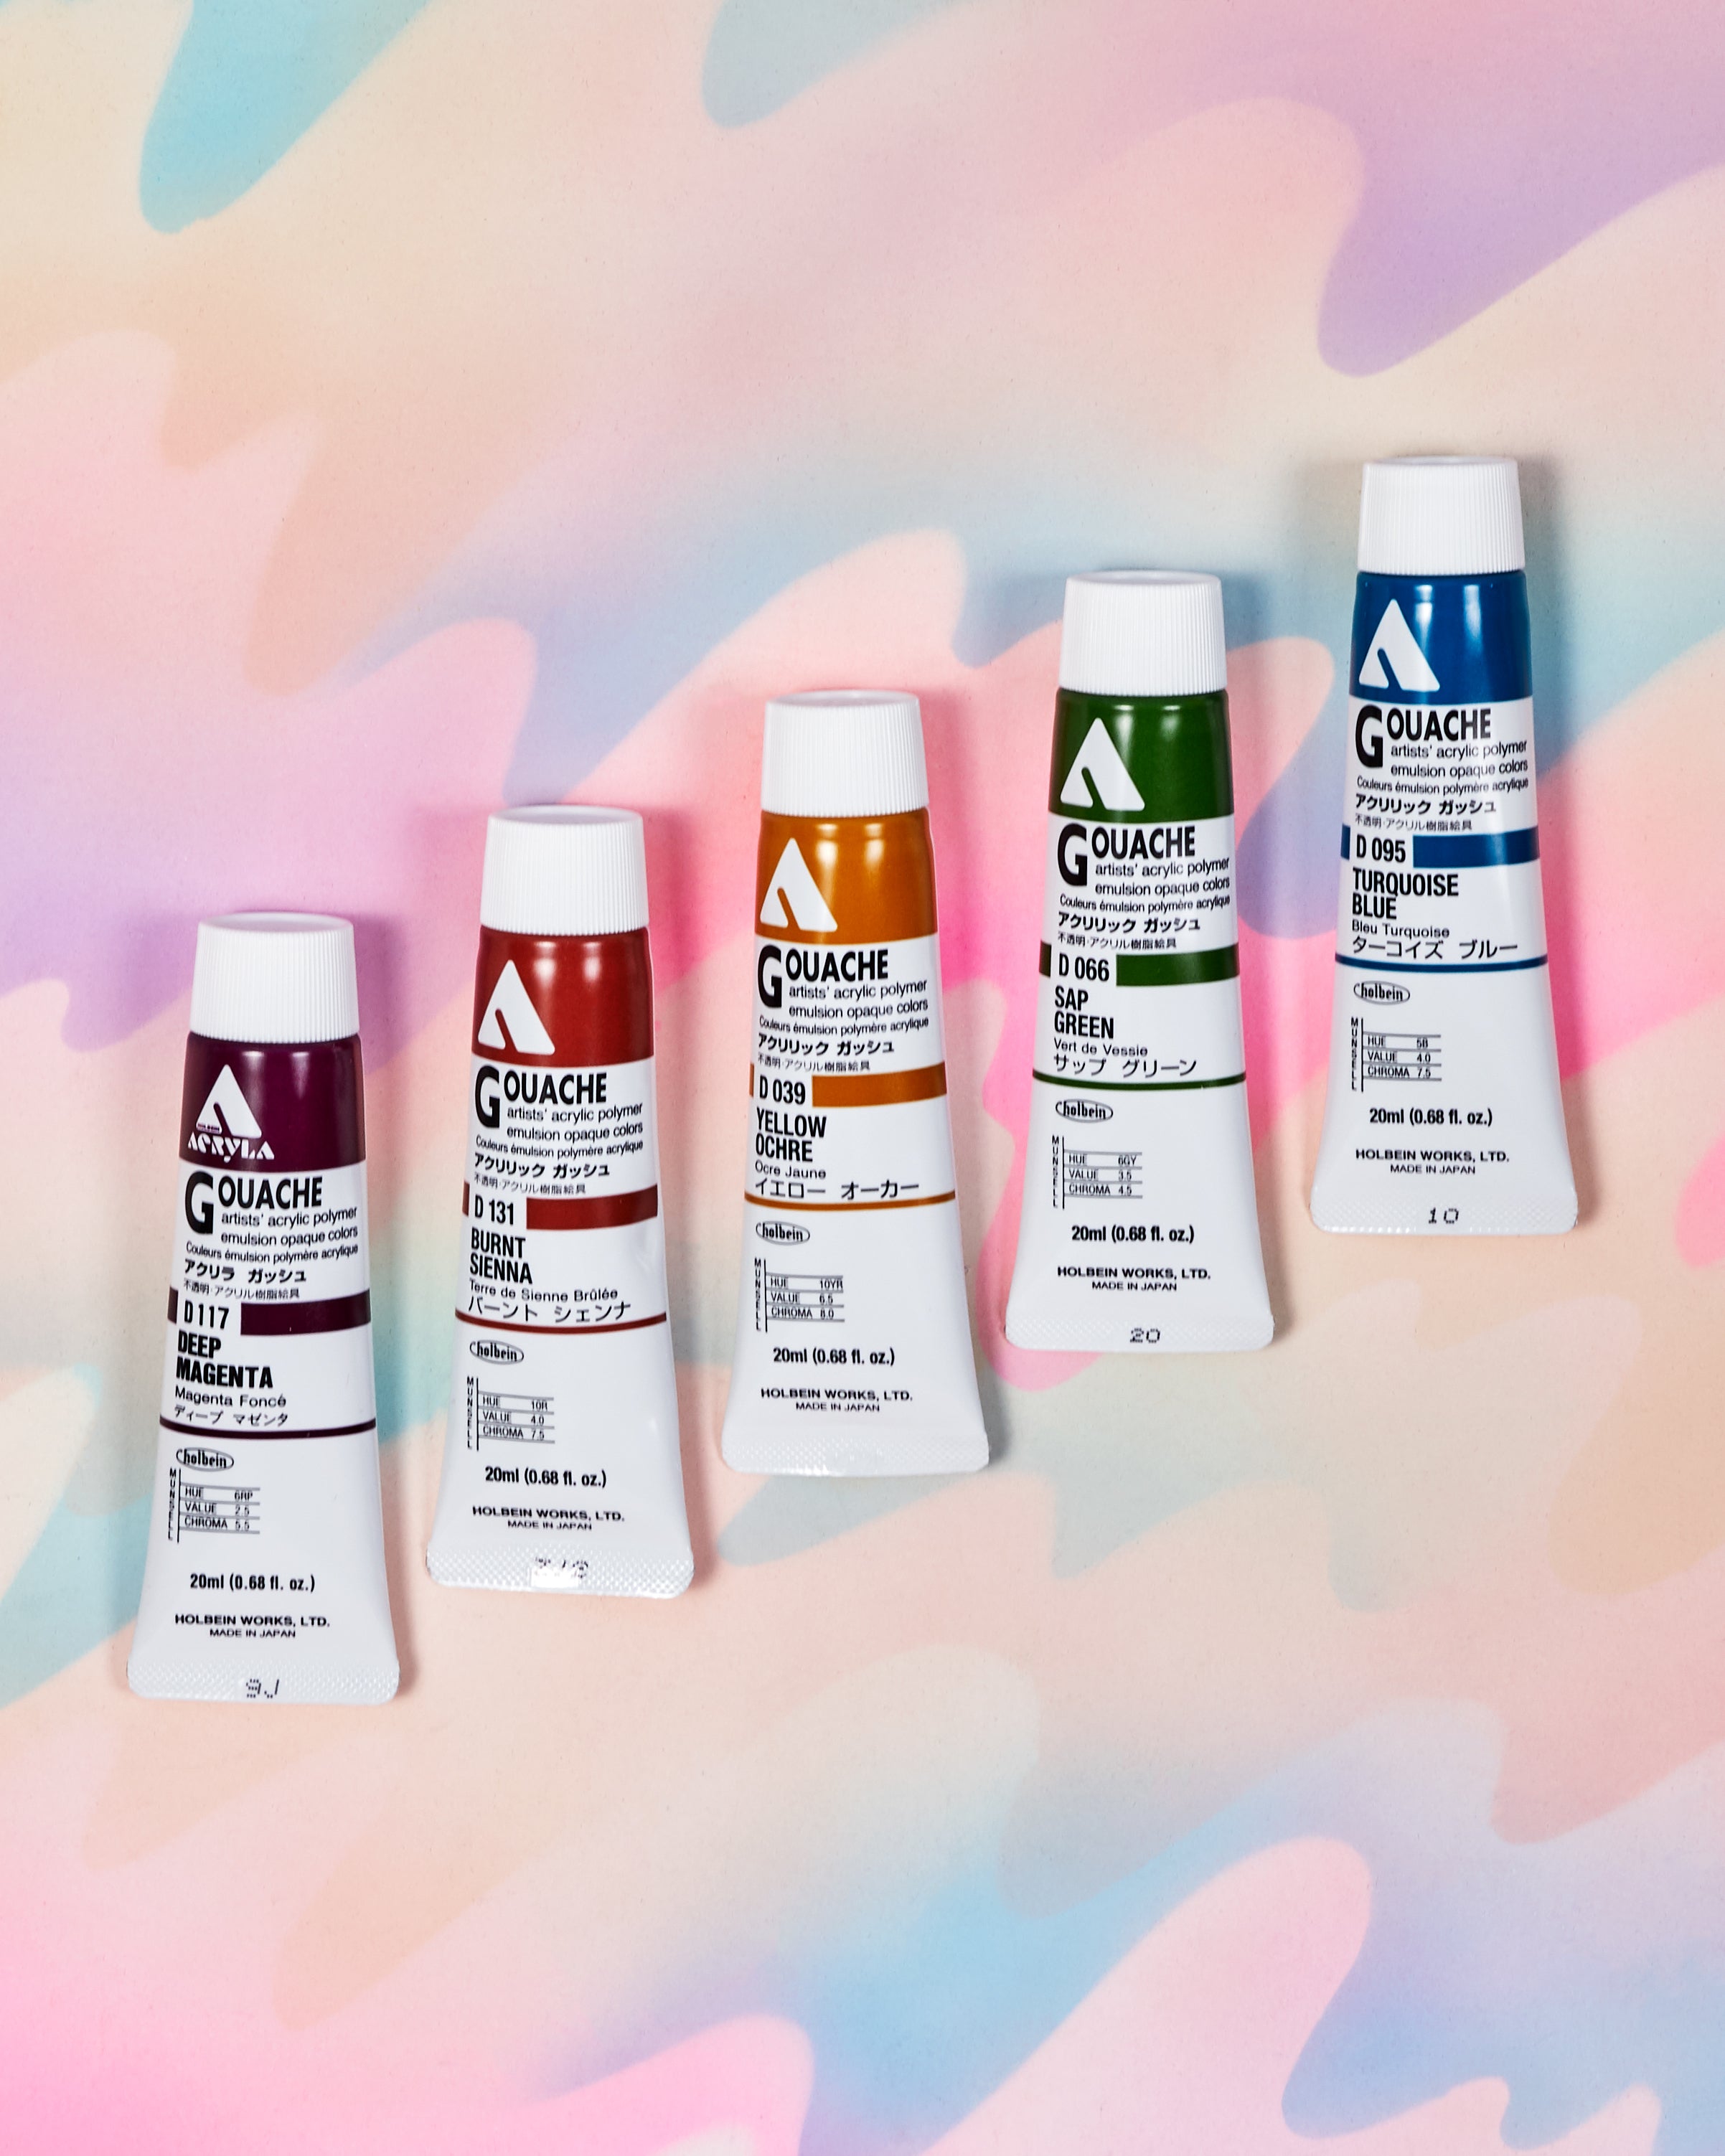 Touch Palette Acryla Gouache Set of 5 - Primary – Crush